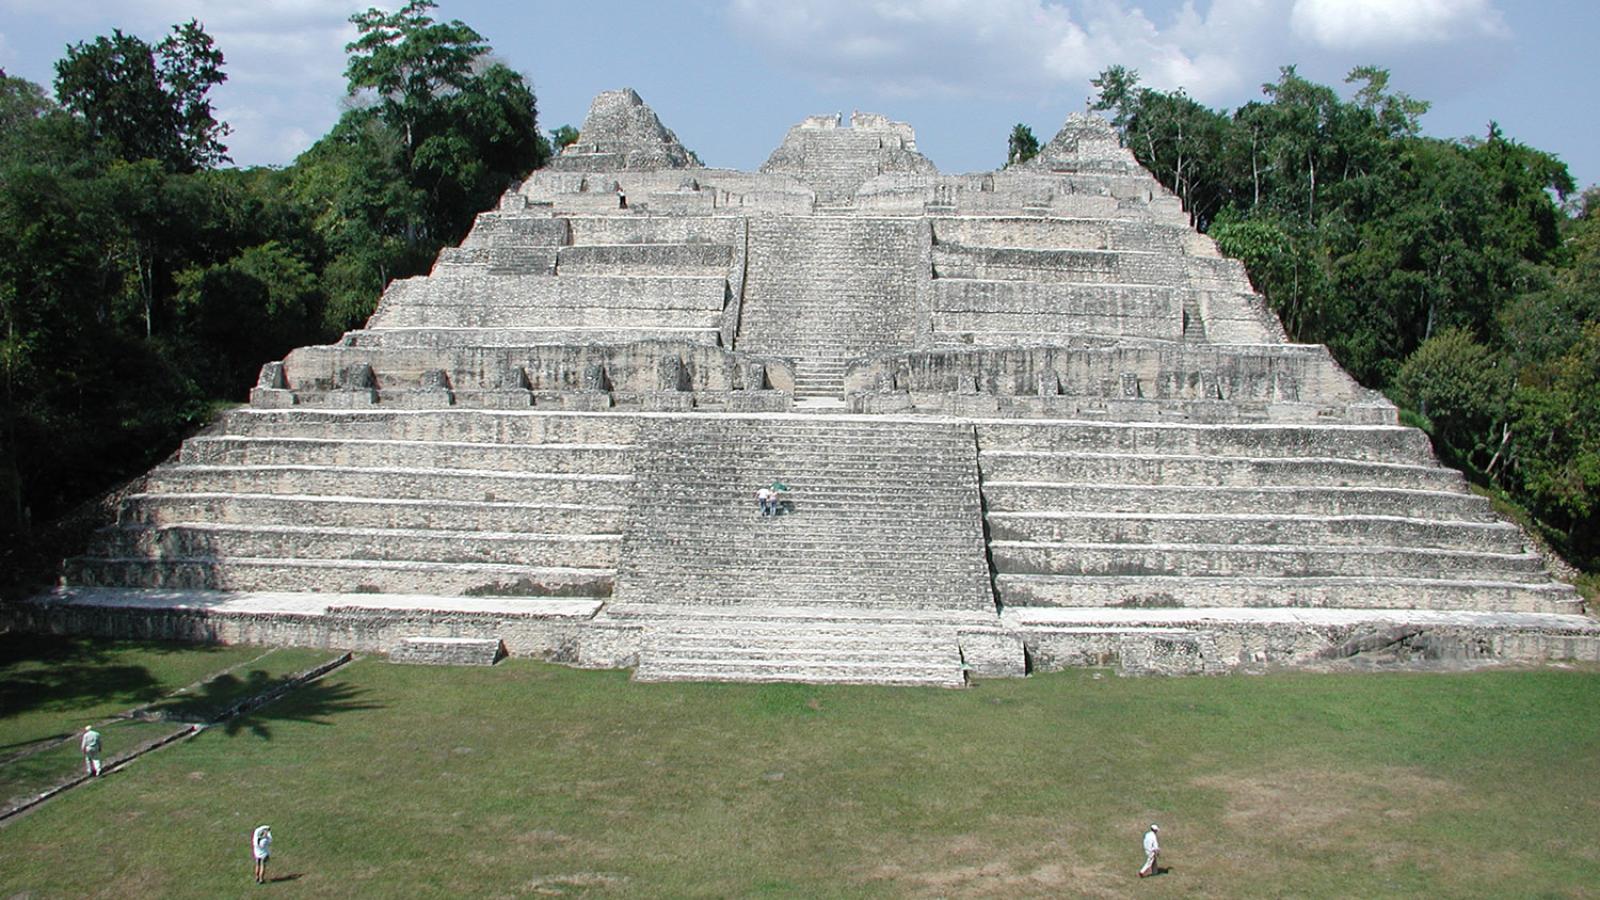 Caana architectural complex at Caracol, Belize